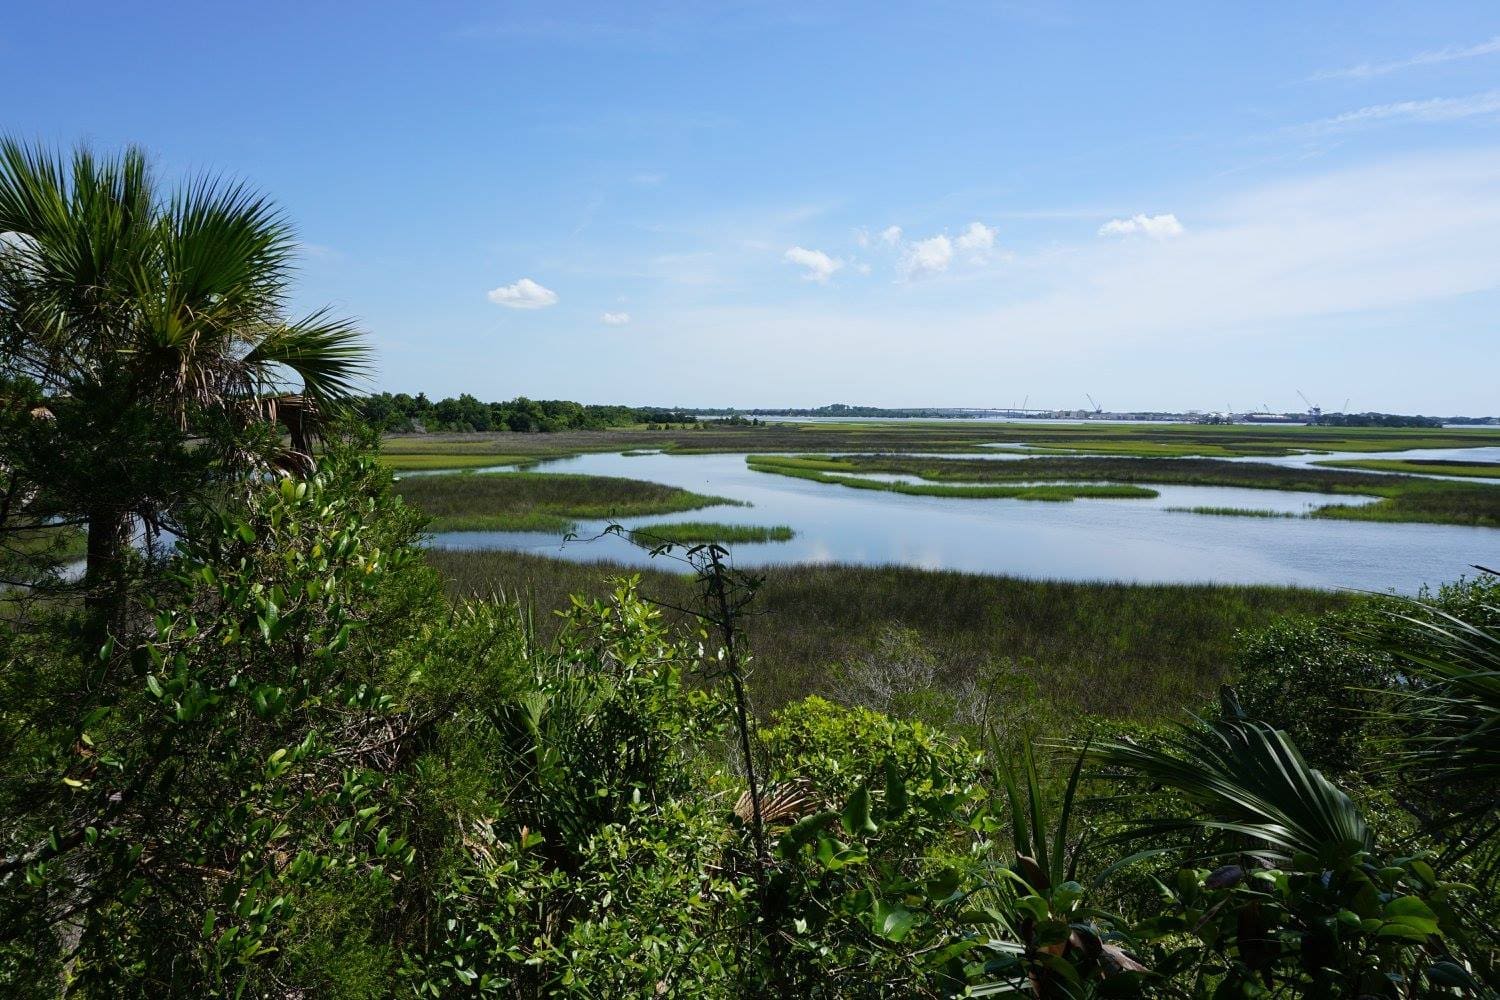 The Timucuan Ecological and Historical Preserve